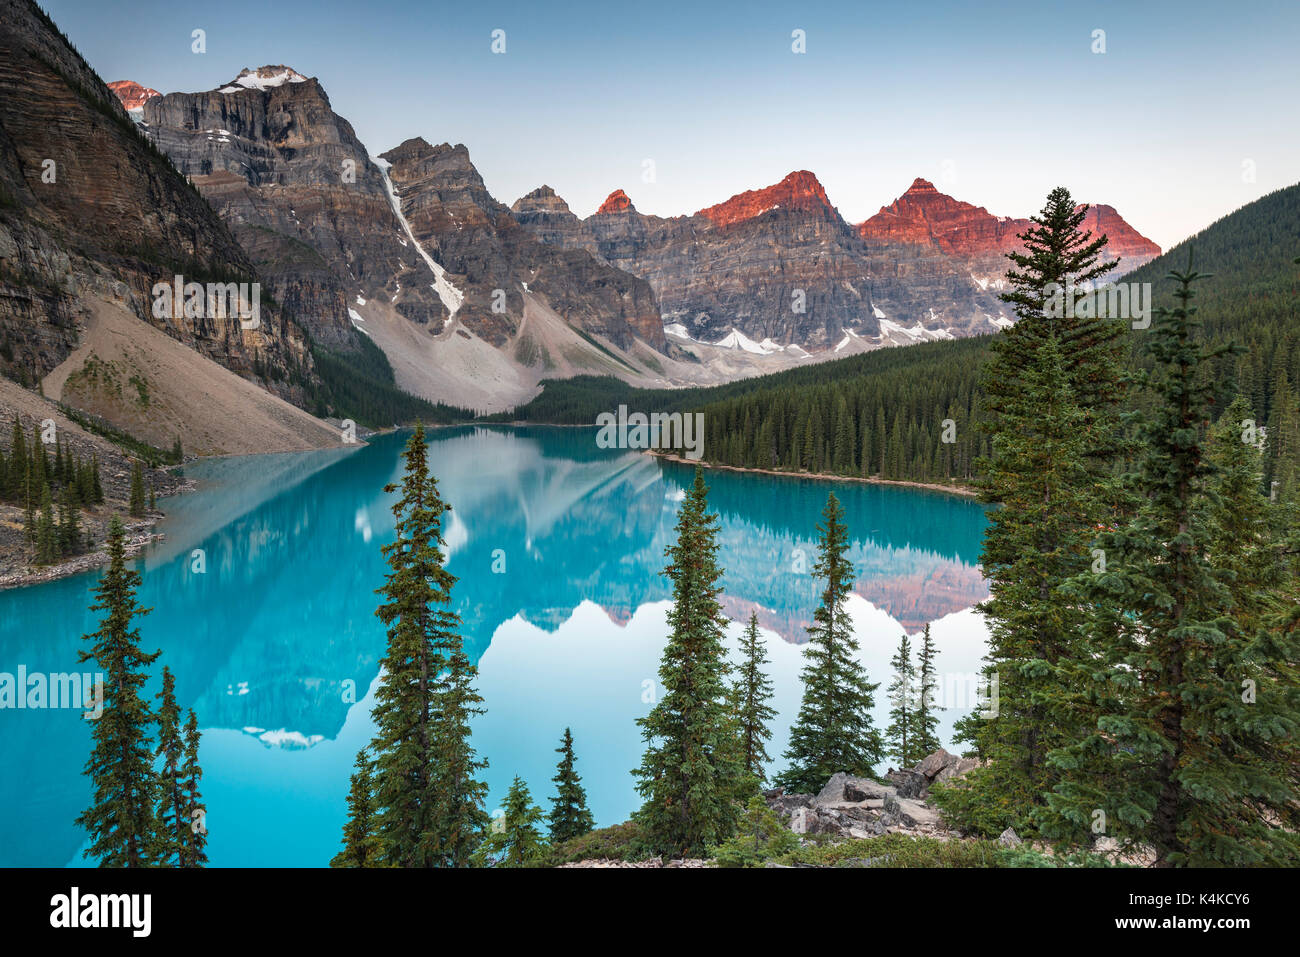 Moraine Lake, morning atmosphere, Valley of the ten peaks, Canadian Rocky Mountains, Banff National Park, Alberta, Canada Stock Photo